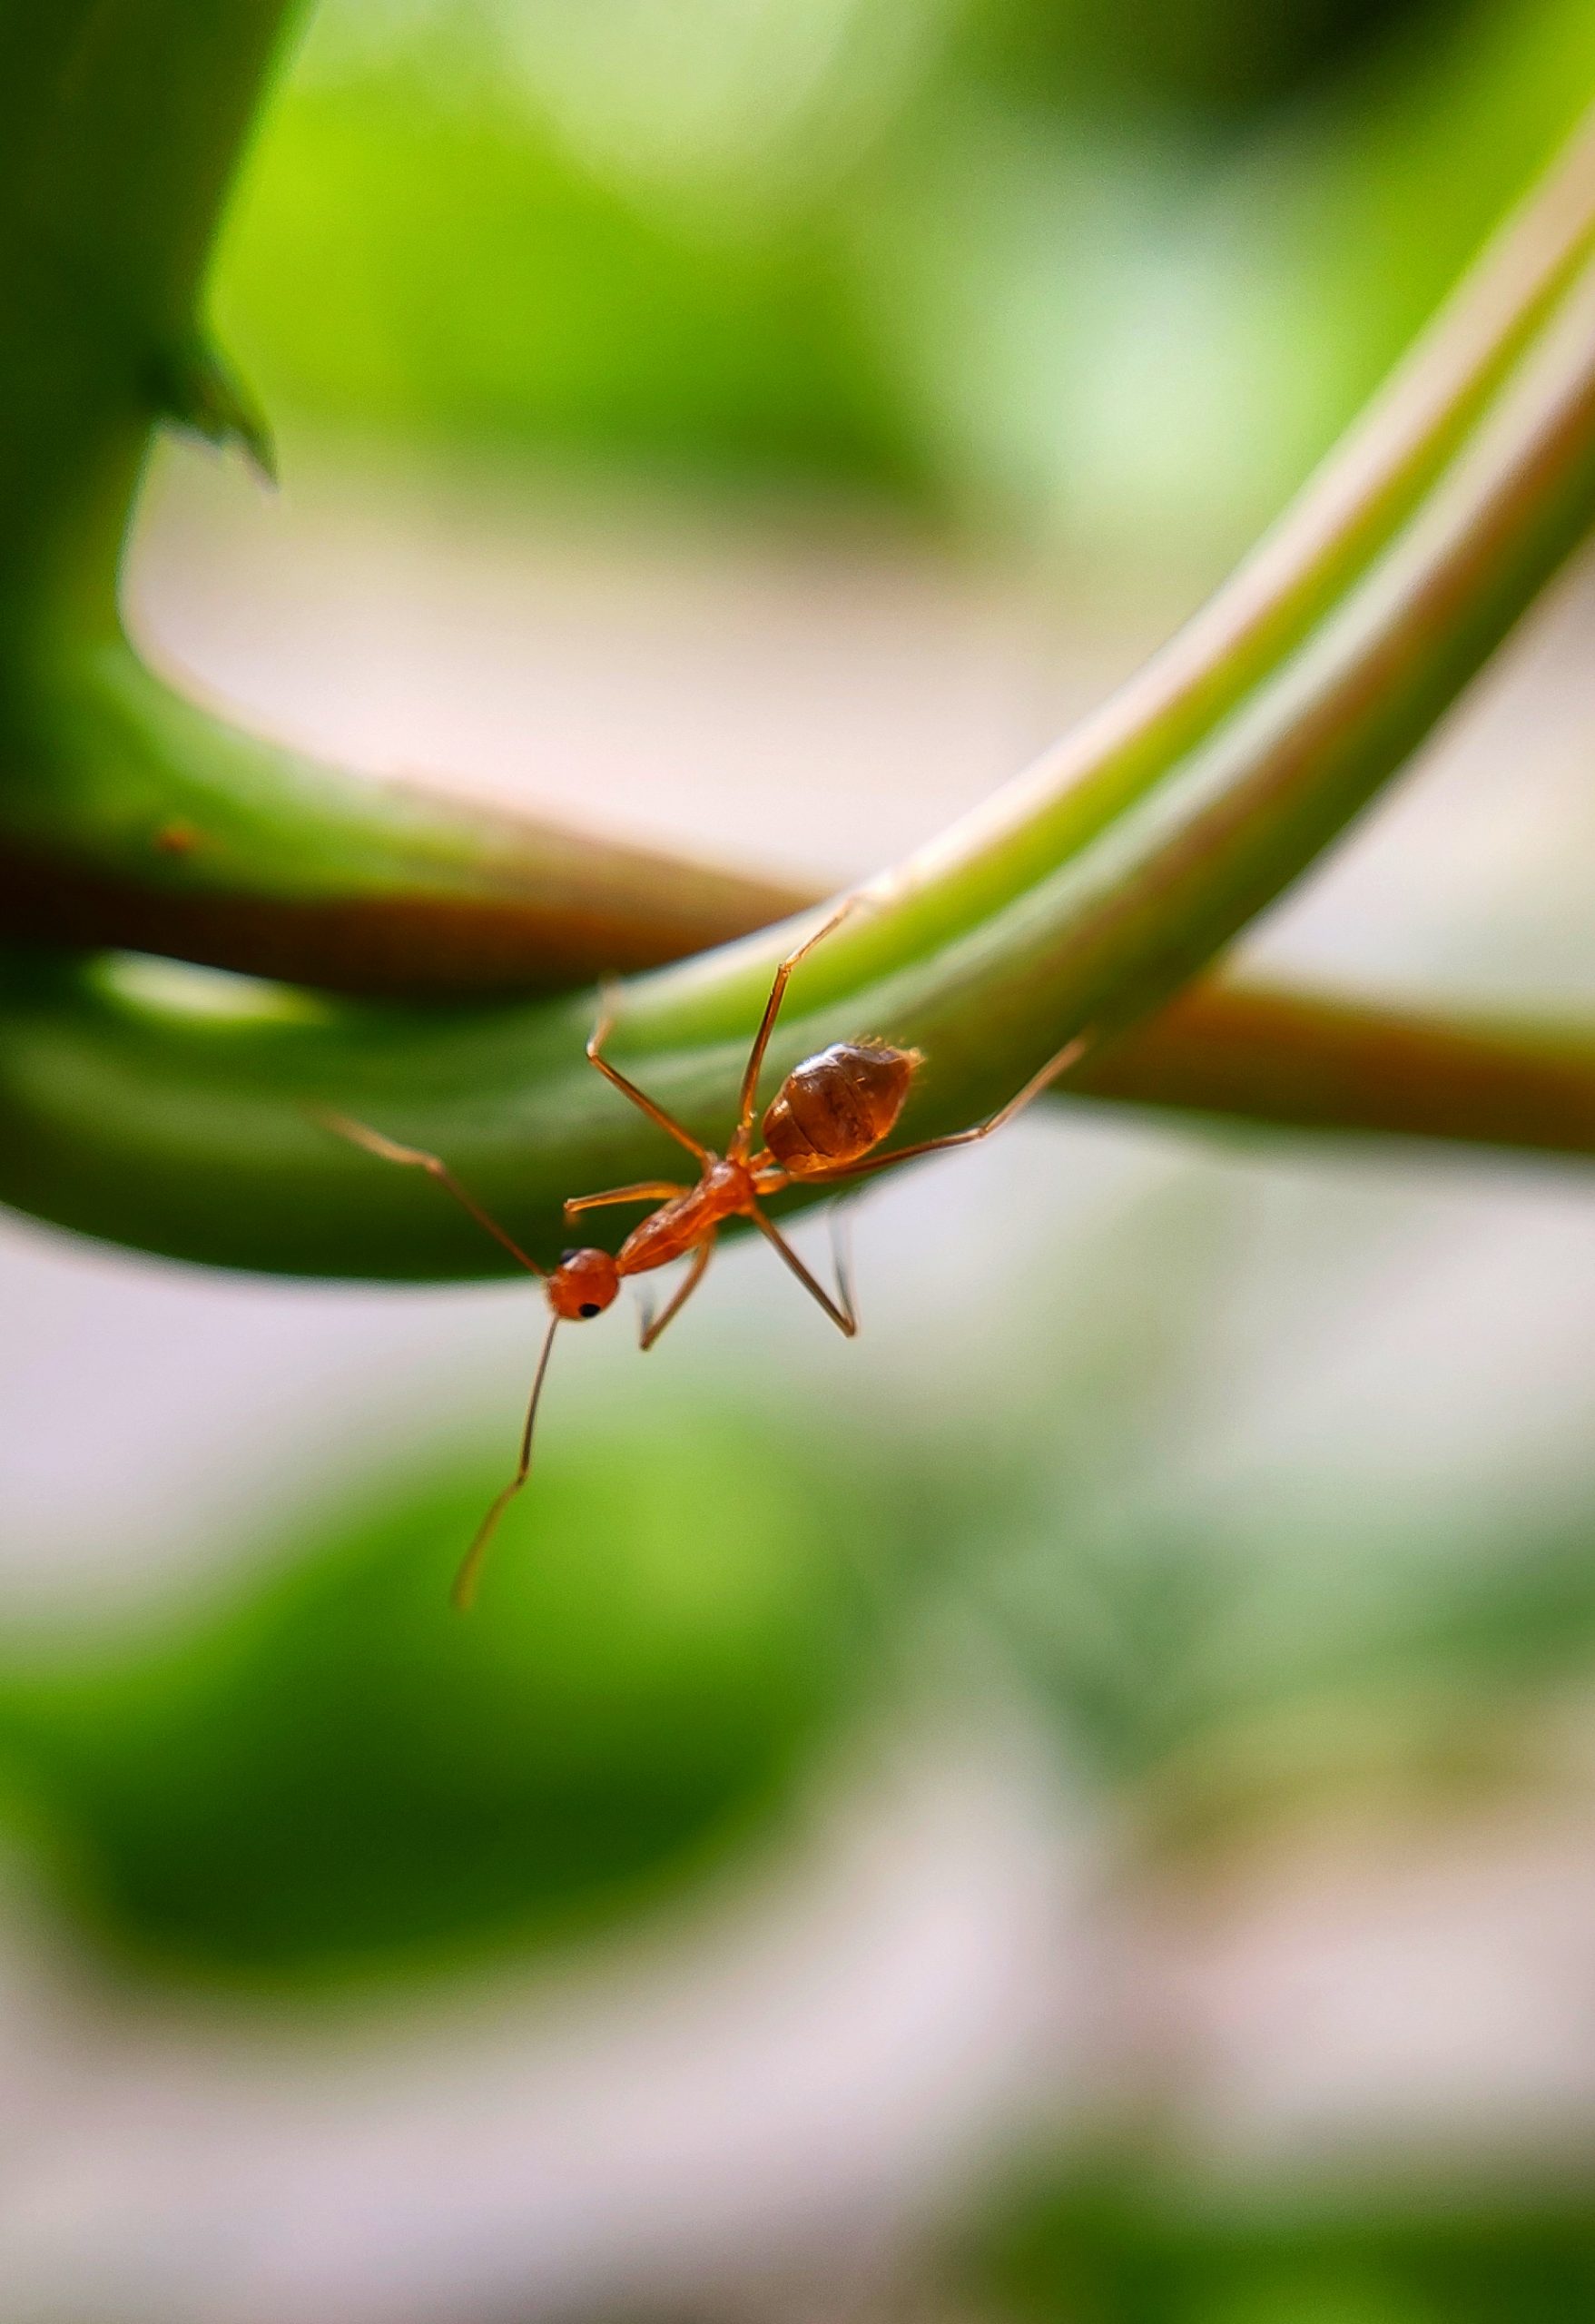 A red ant on a plant stem